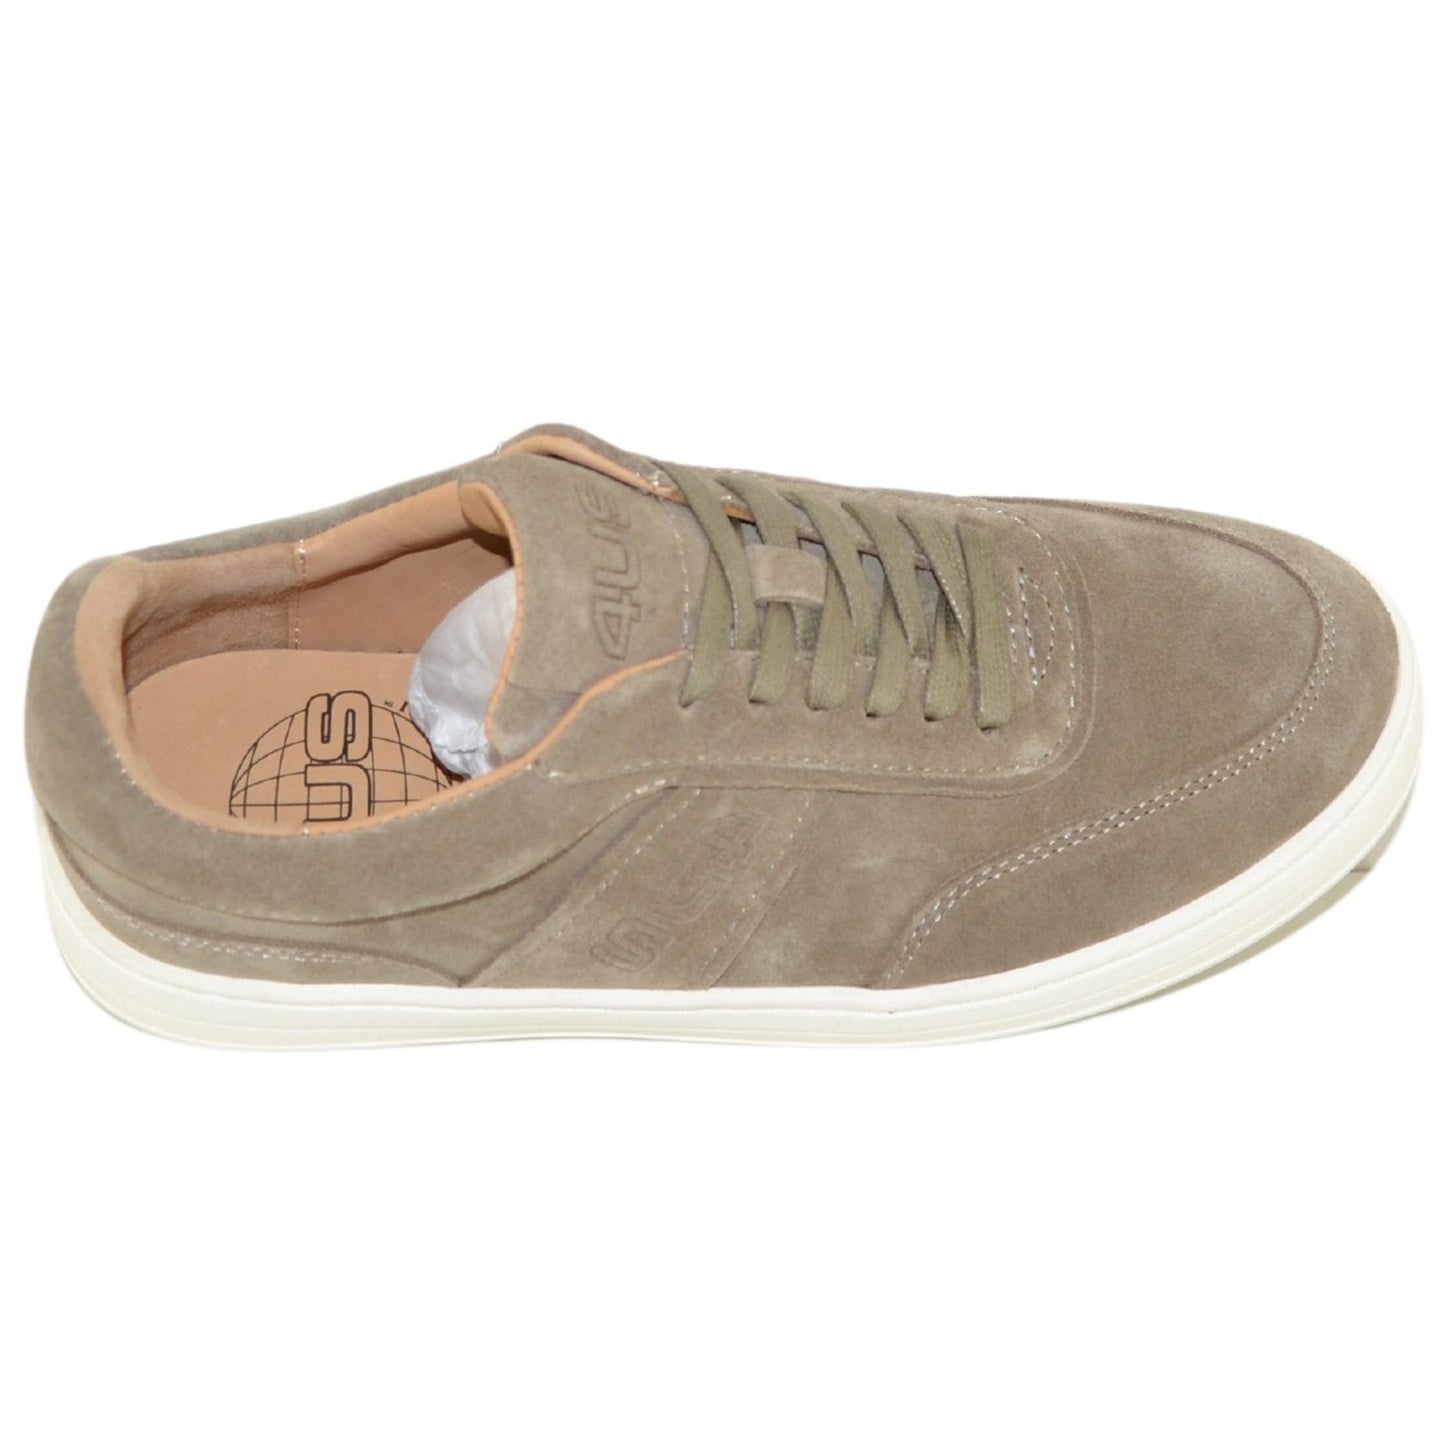 Sneakers Cesare Paciotti 4us man taupe suede leather